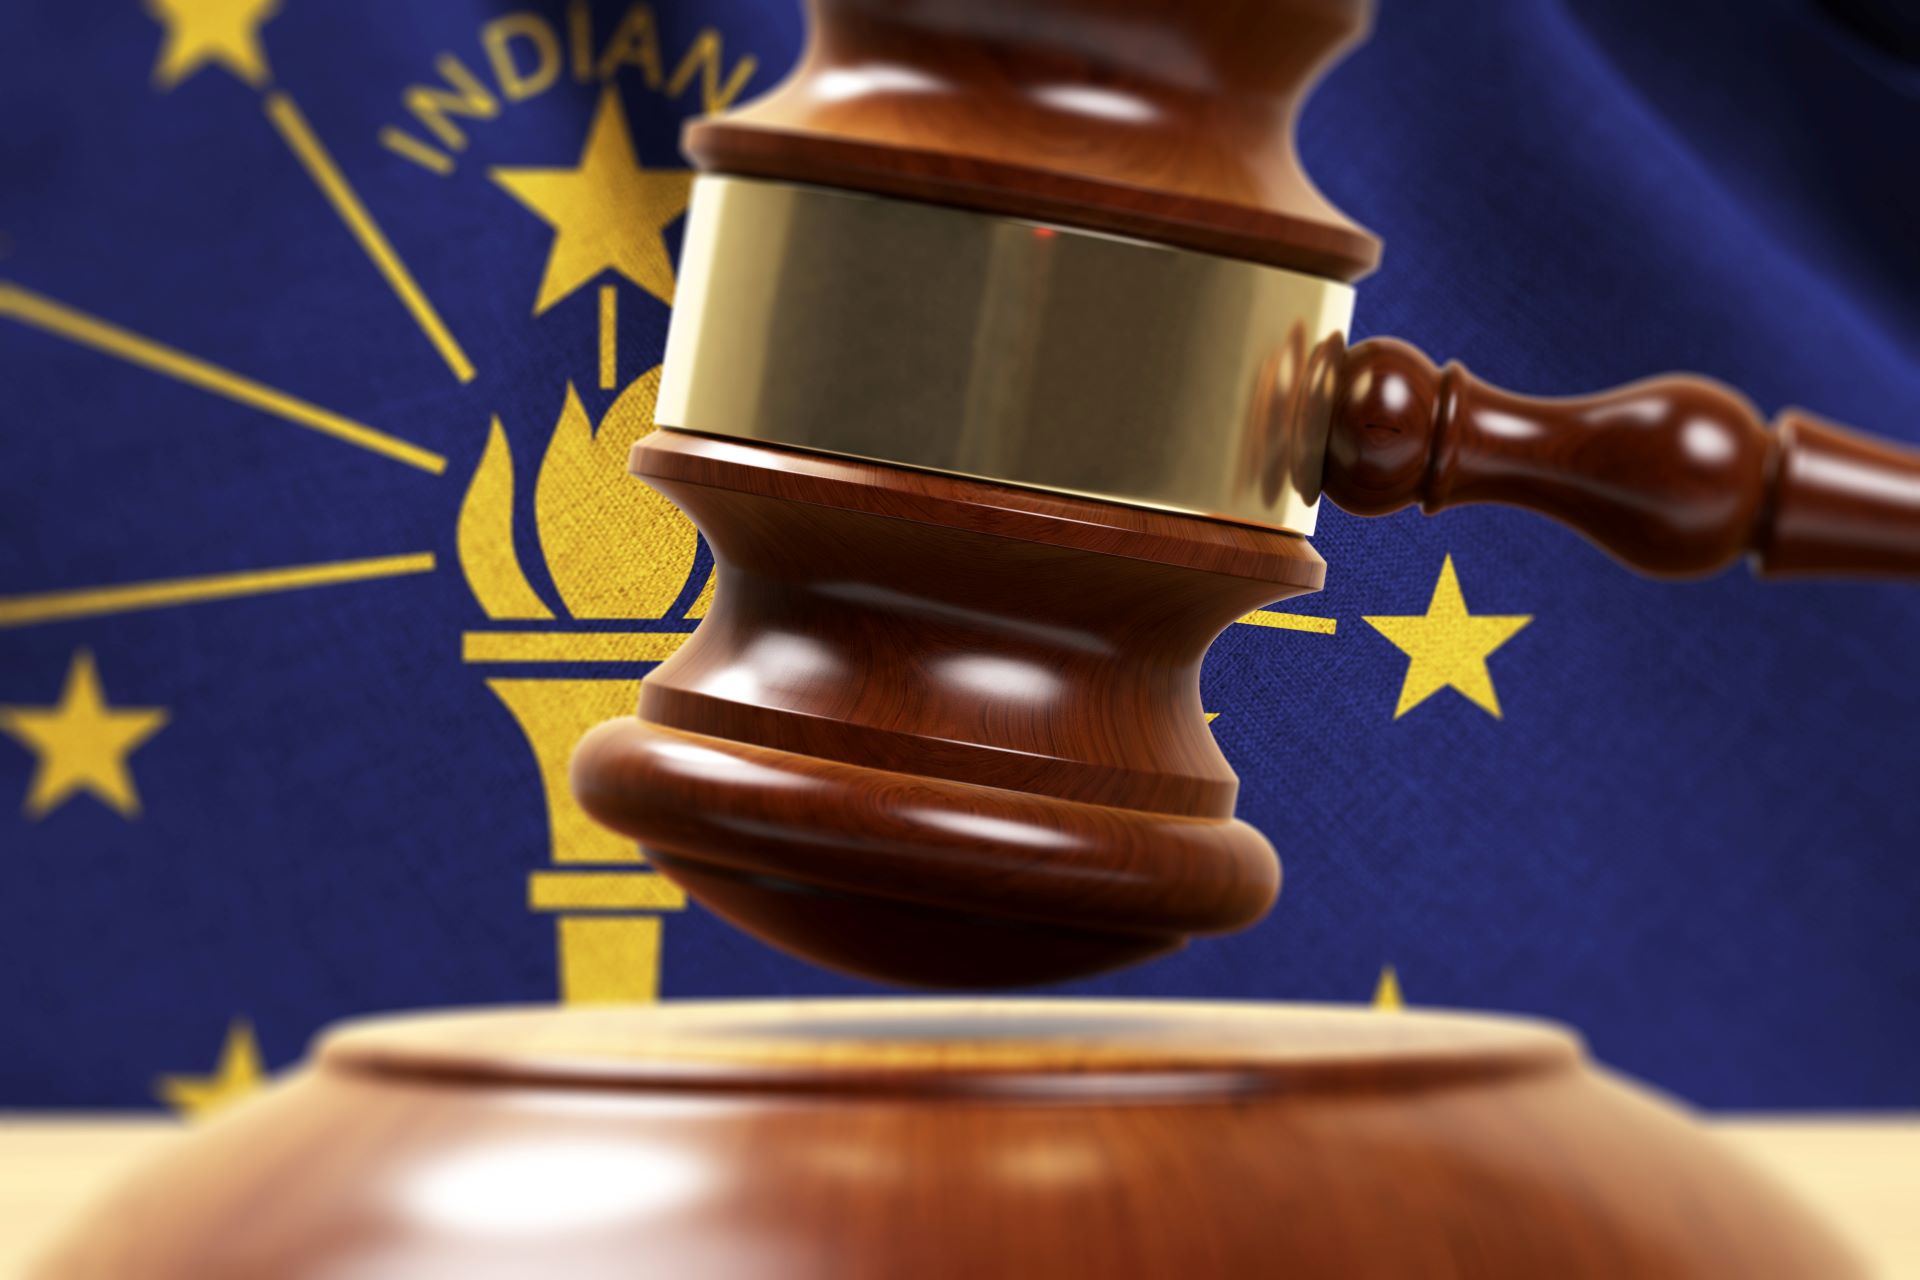 Indiana Law